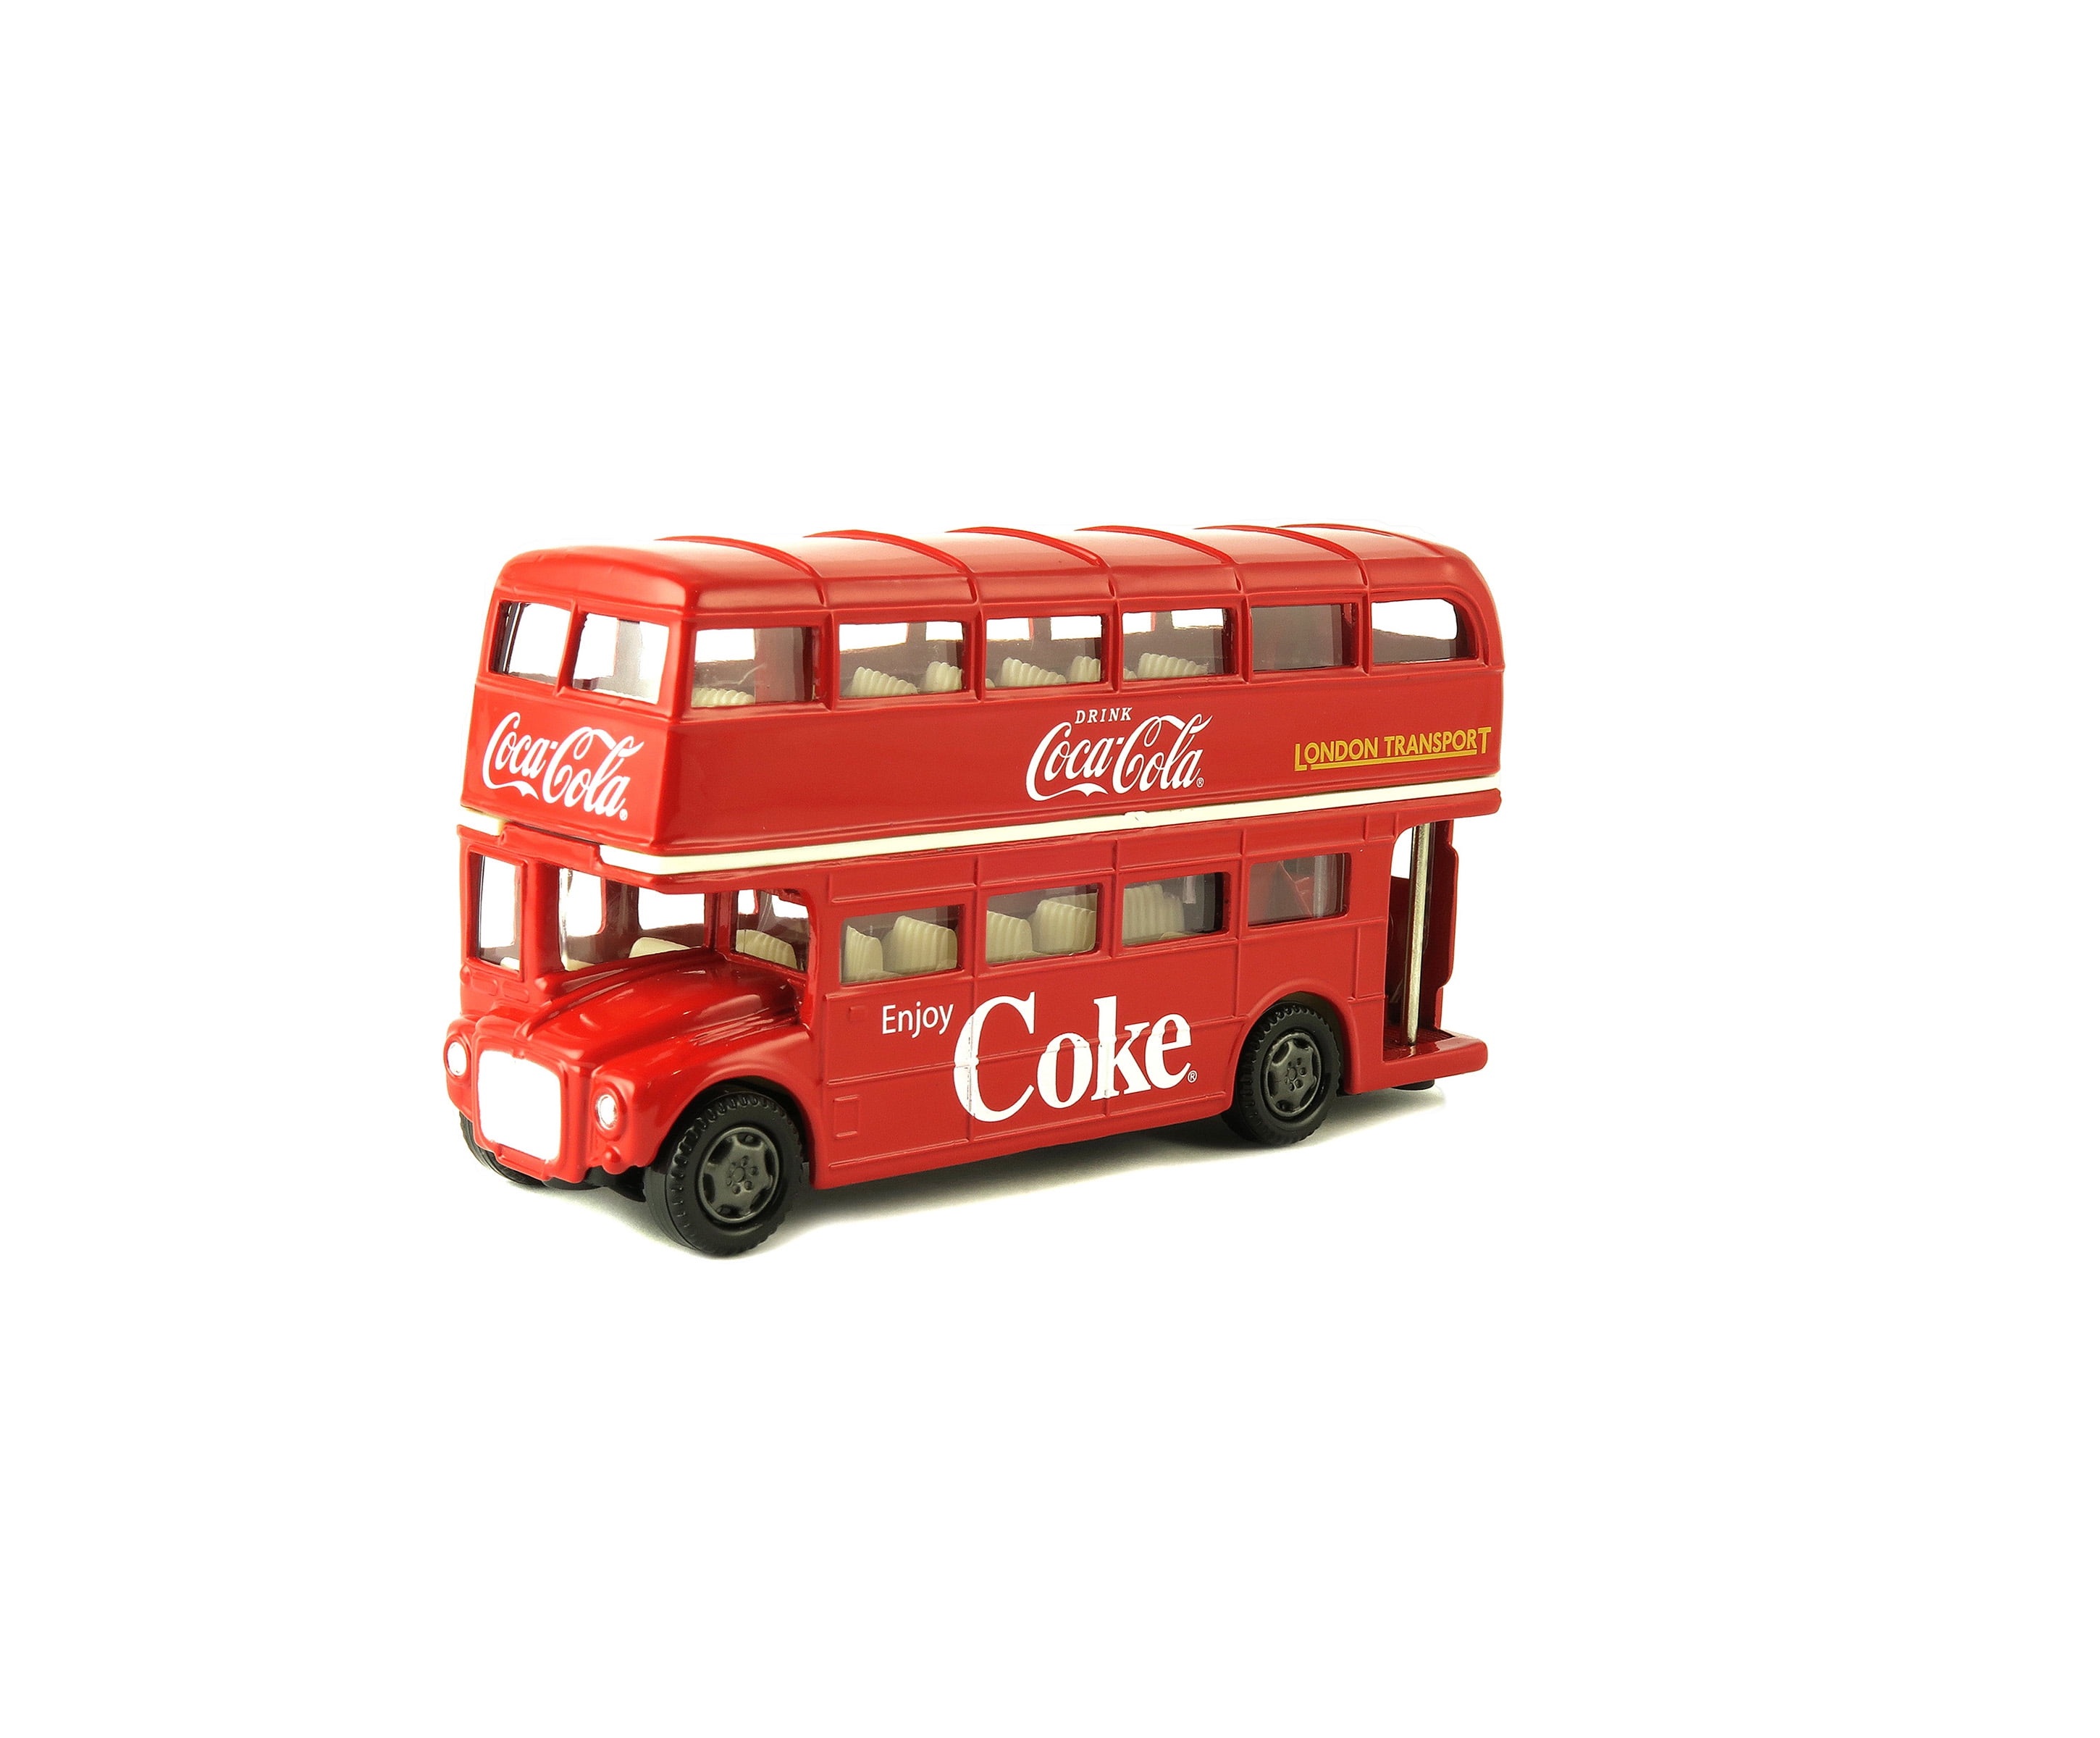 1/50 Scale Double Decker Bus Toy ROMIRUS Pull Back City Bus Toy 7 London Double Decker Bus Routemaster City Tourist Closed Top Diecast with Lights Sounds and Openable Doors 